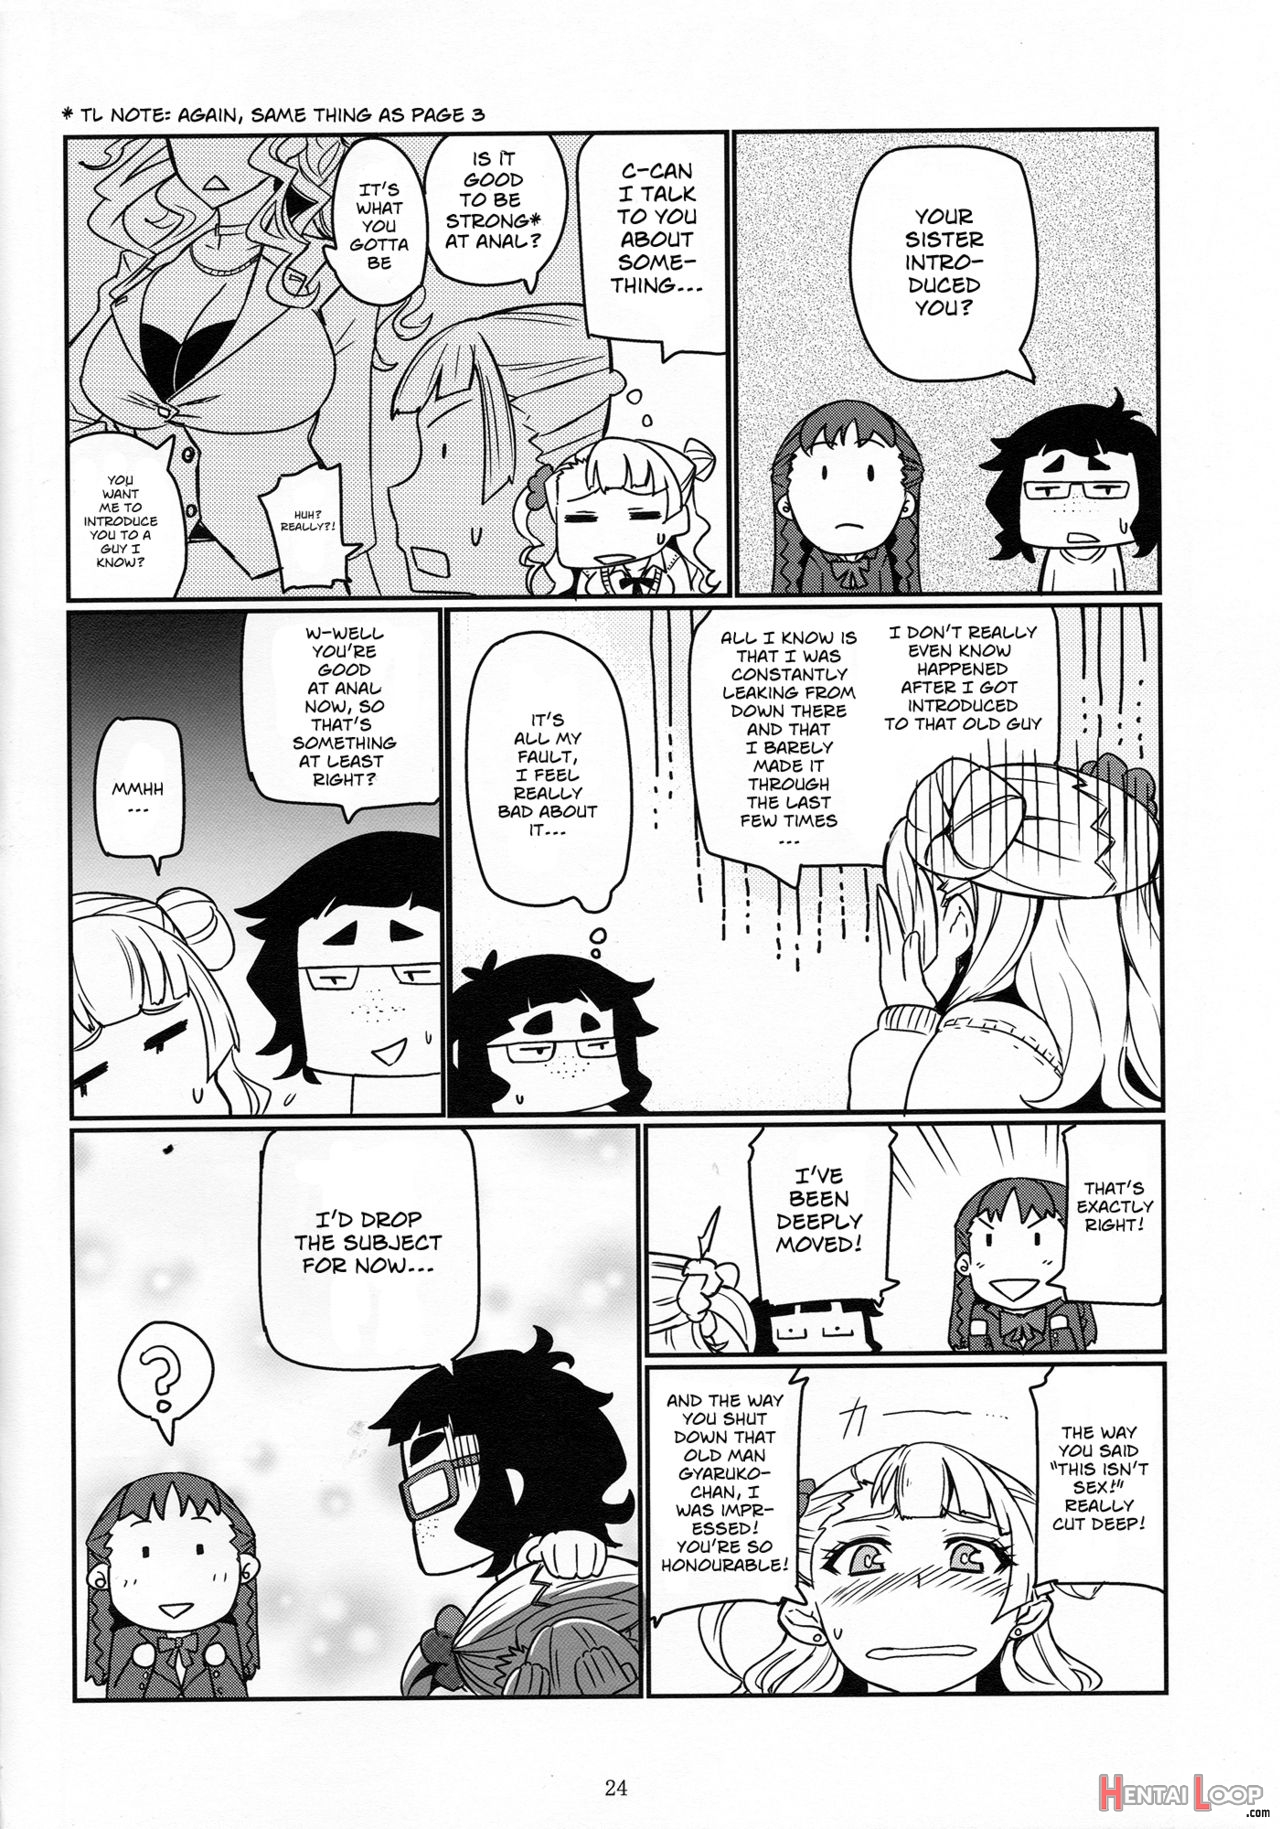 Galko Ah! page 23